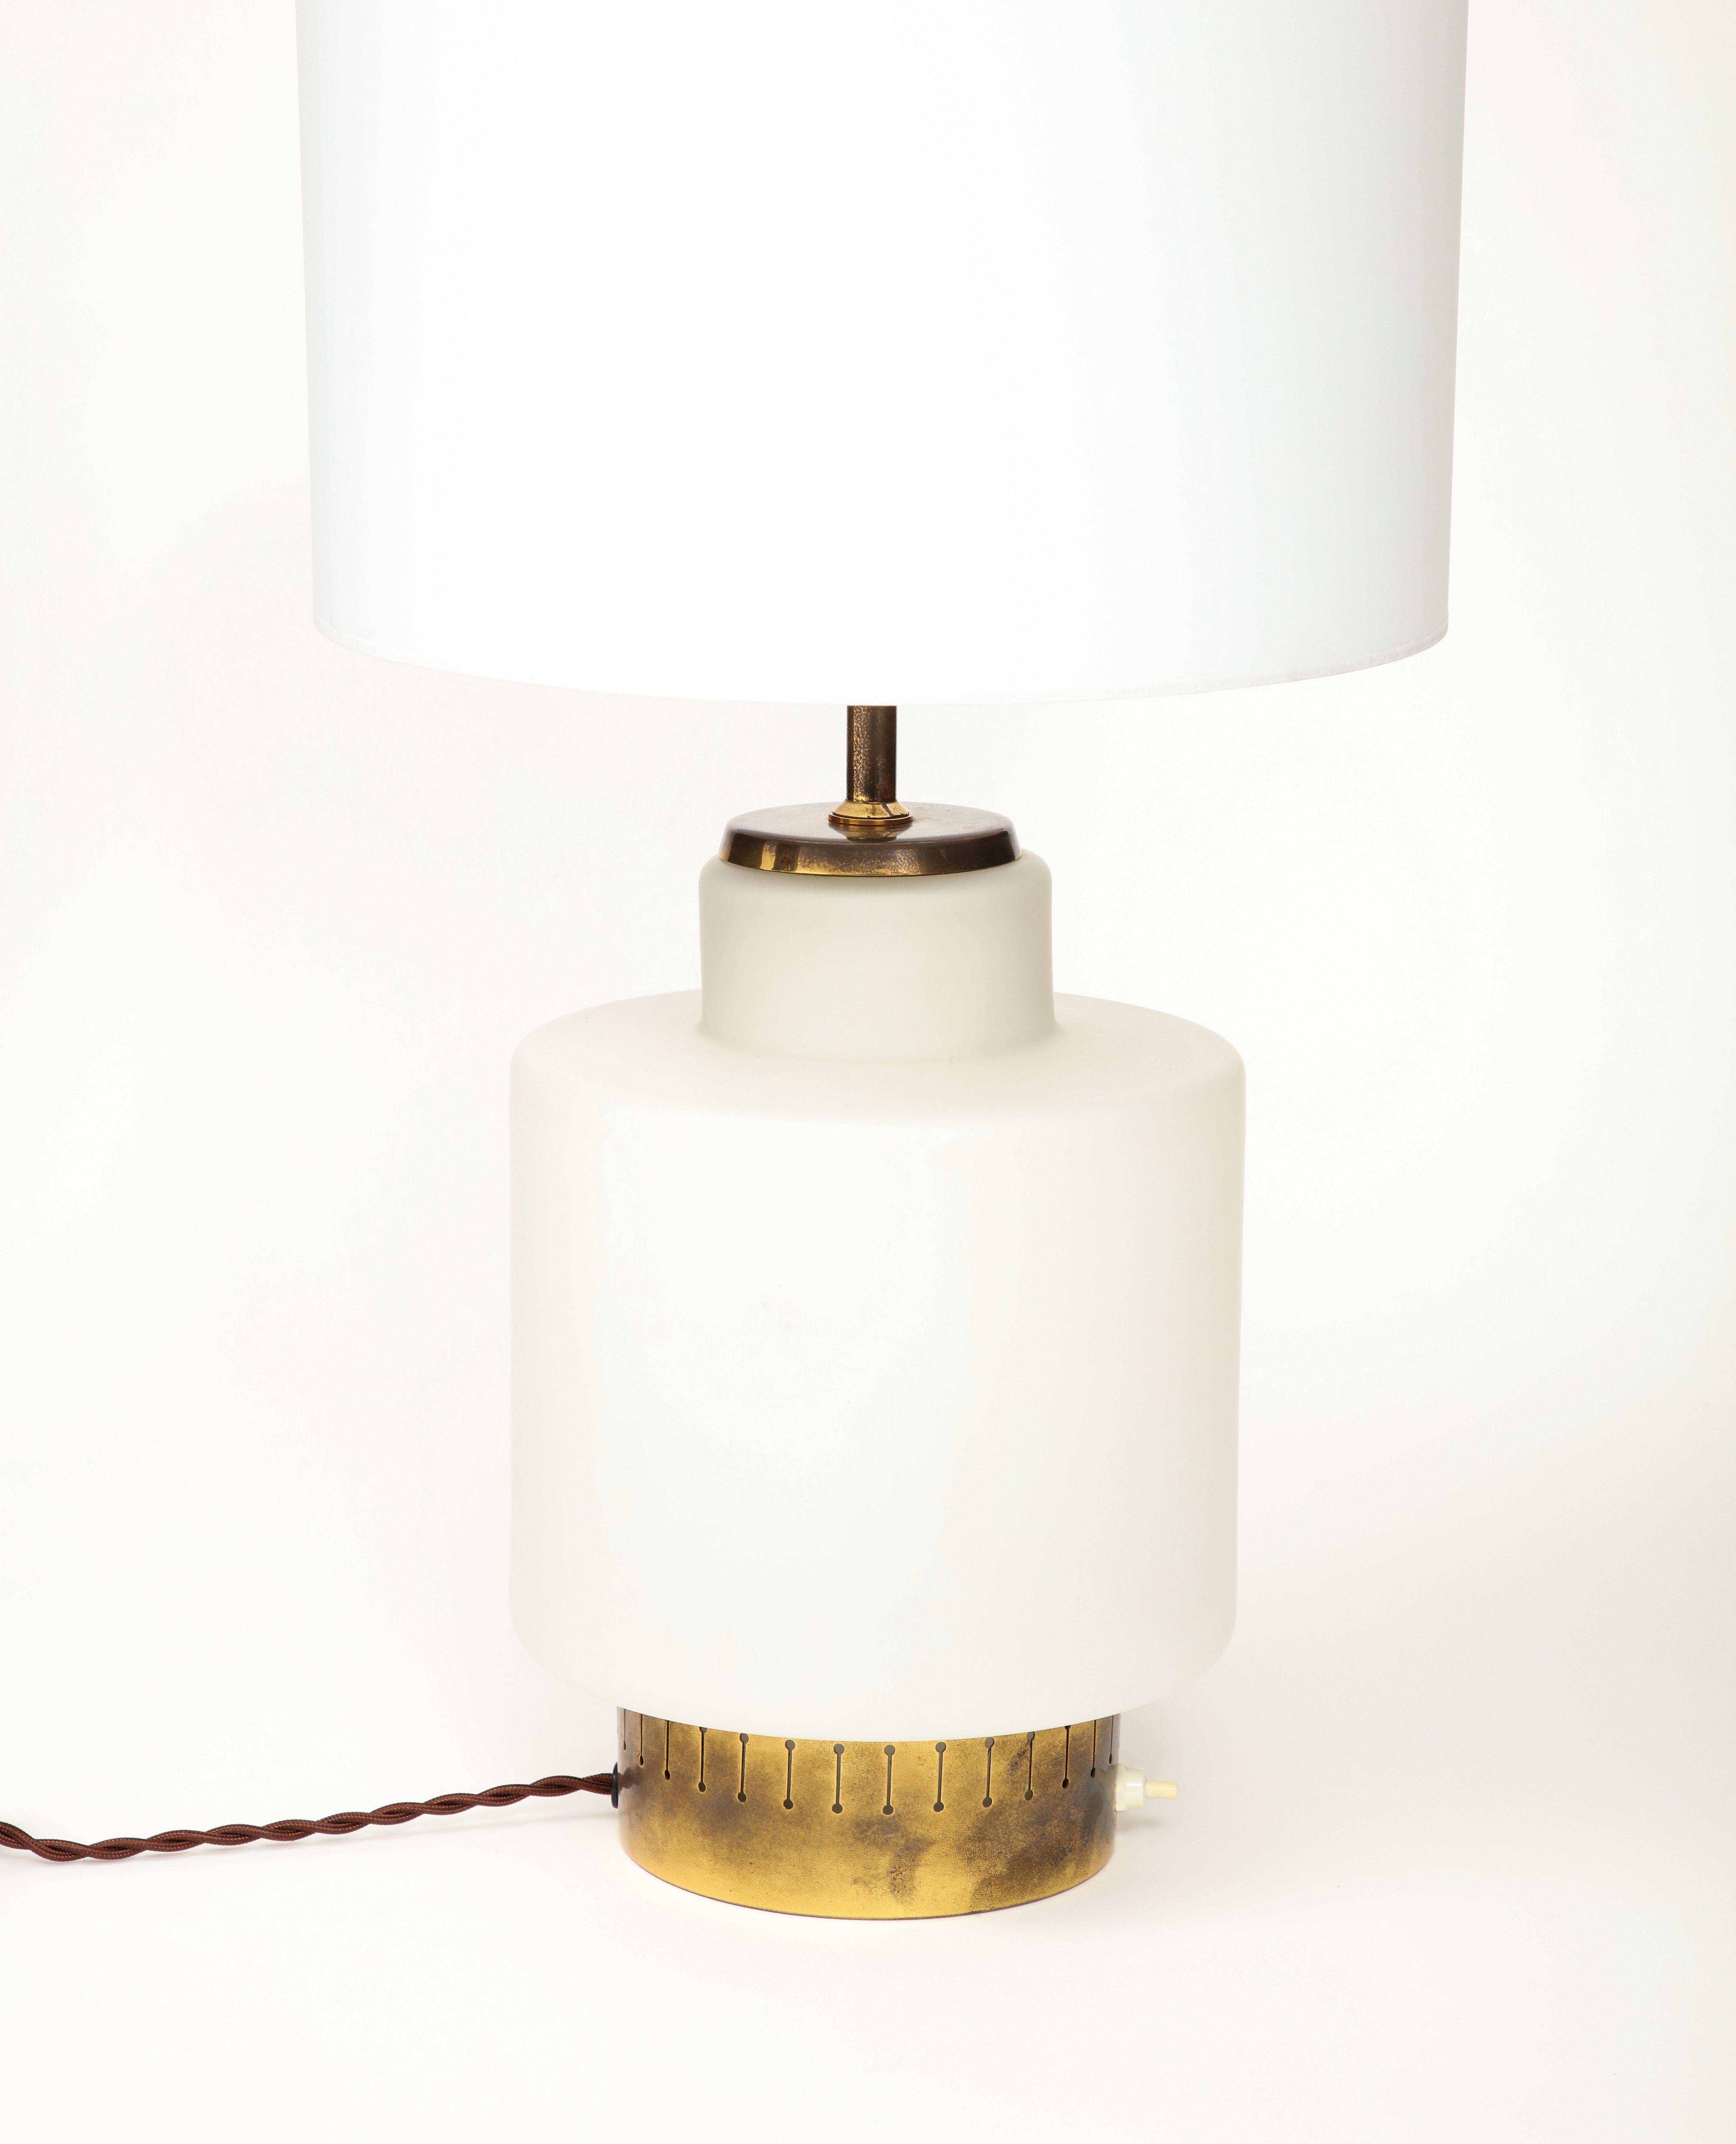 Stilnovo Opaline & Brass Lamp, mod. 8055, Parchment Shade, Italy, c. 1950's For Sale 4